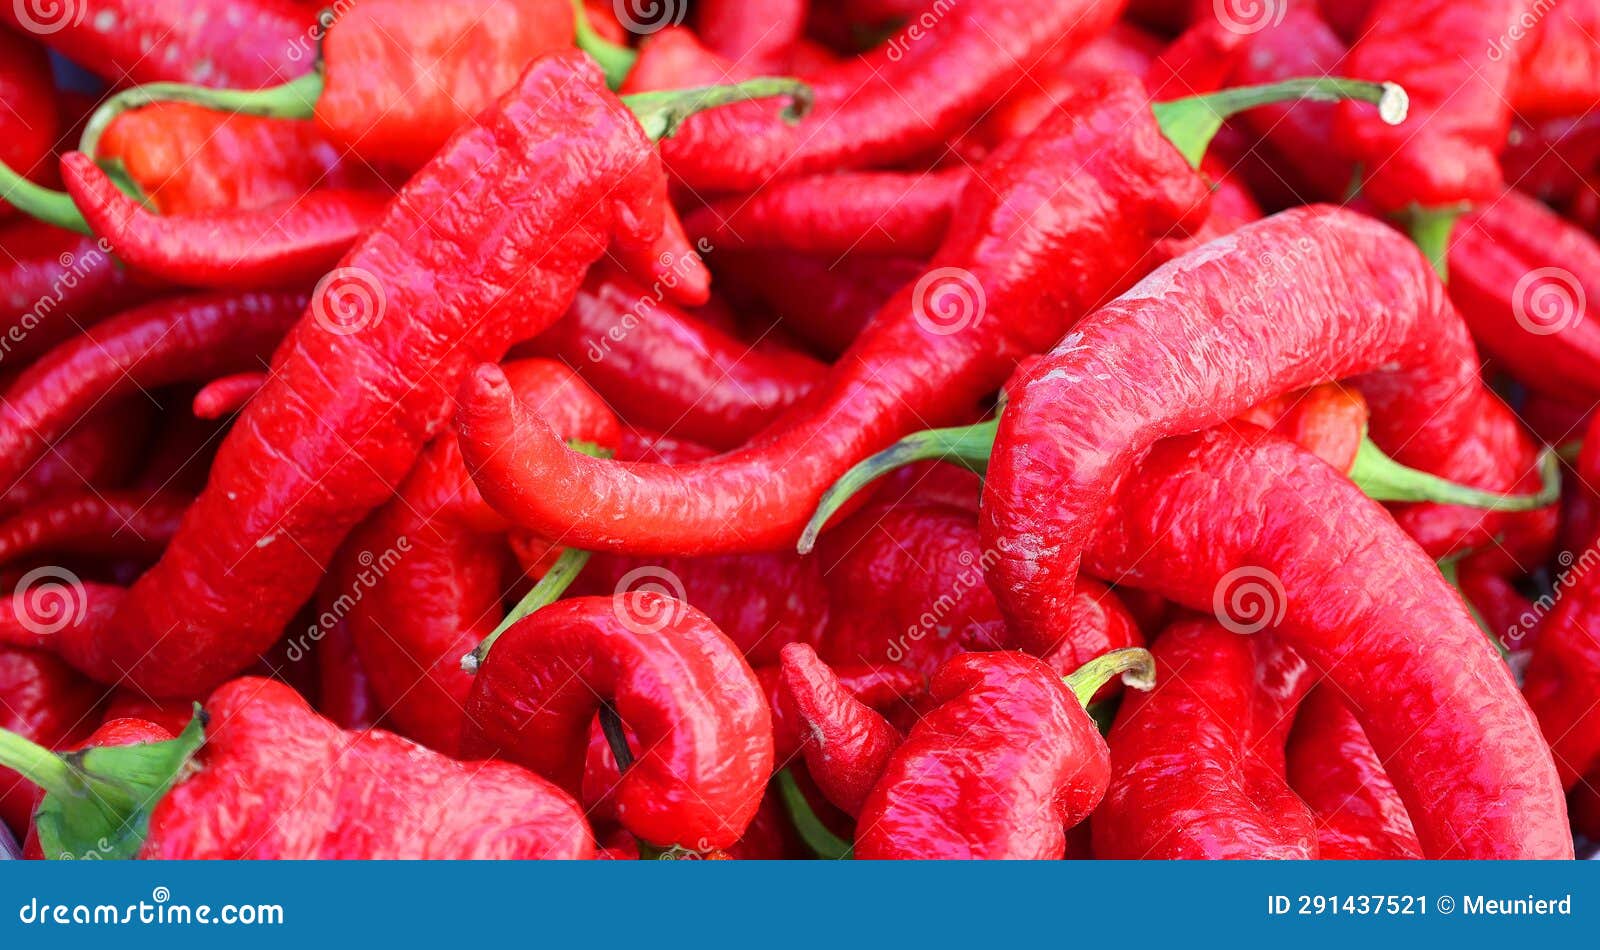 pimientos choriceros, dry hot guindilla peppers